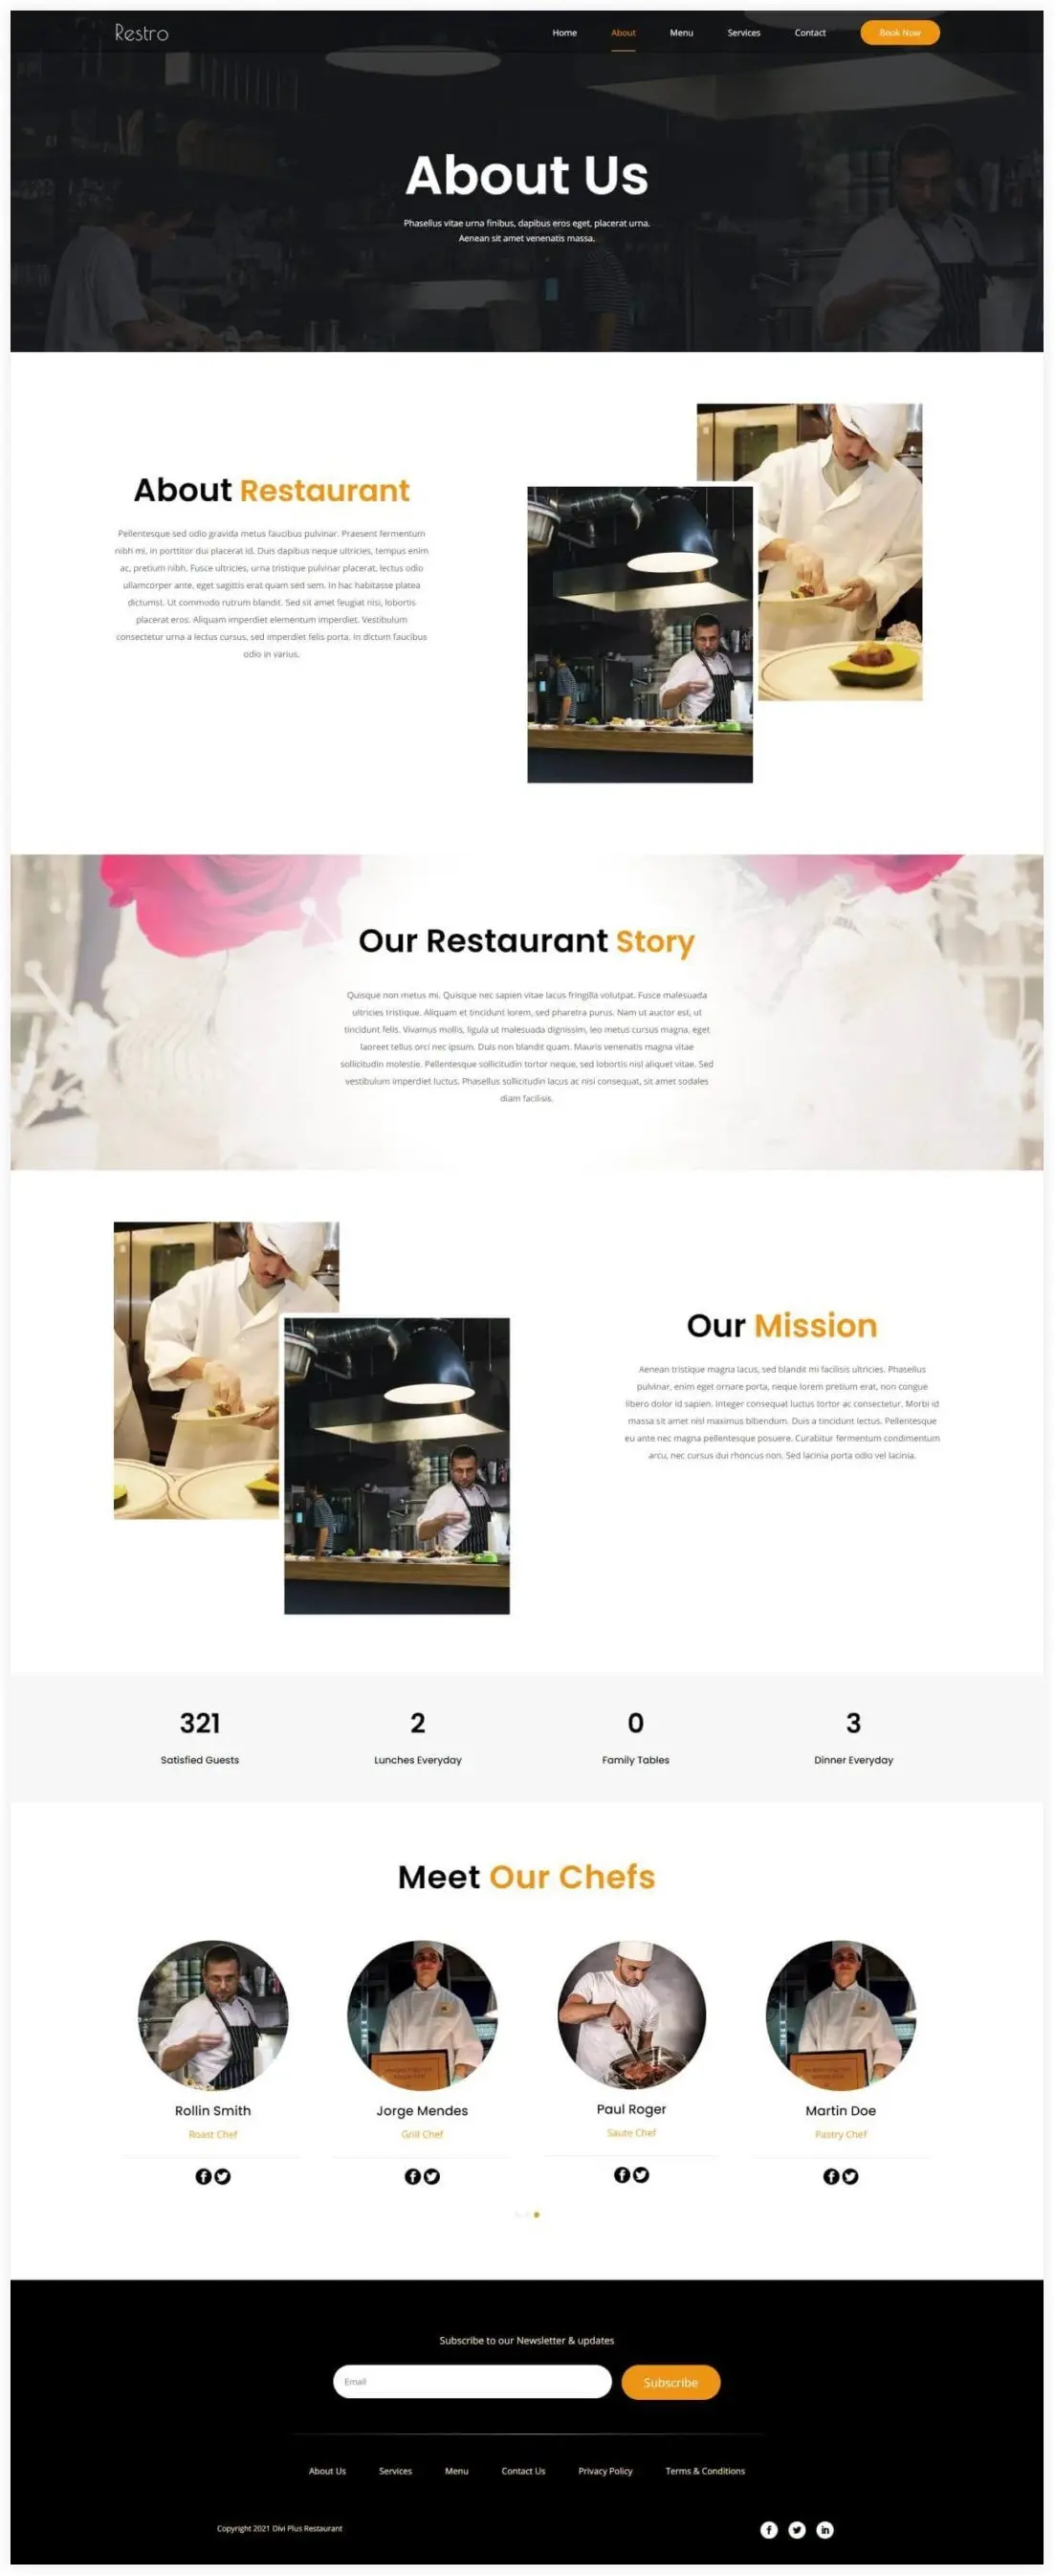 Restaurant about page layout